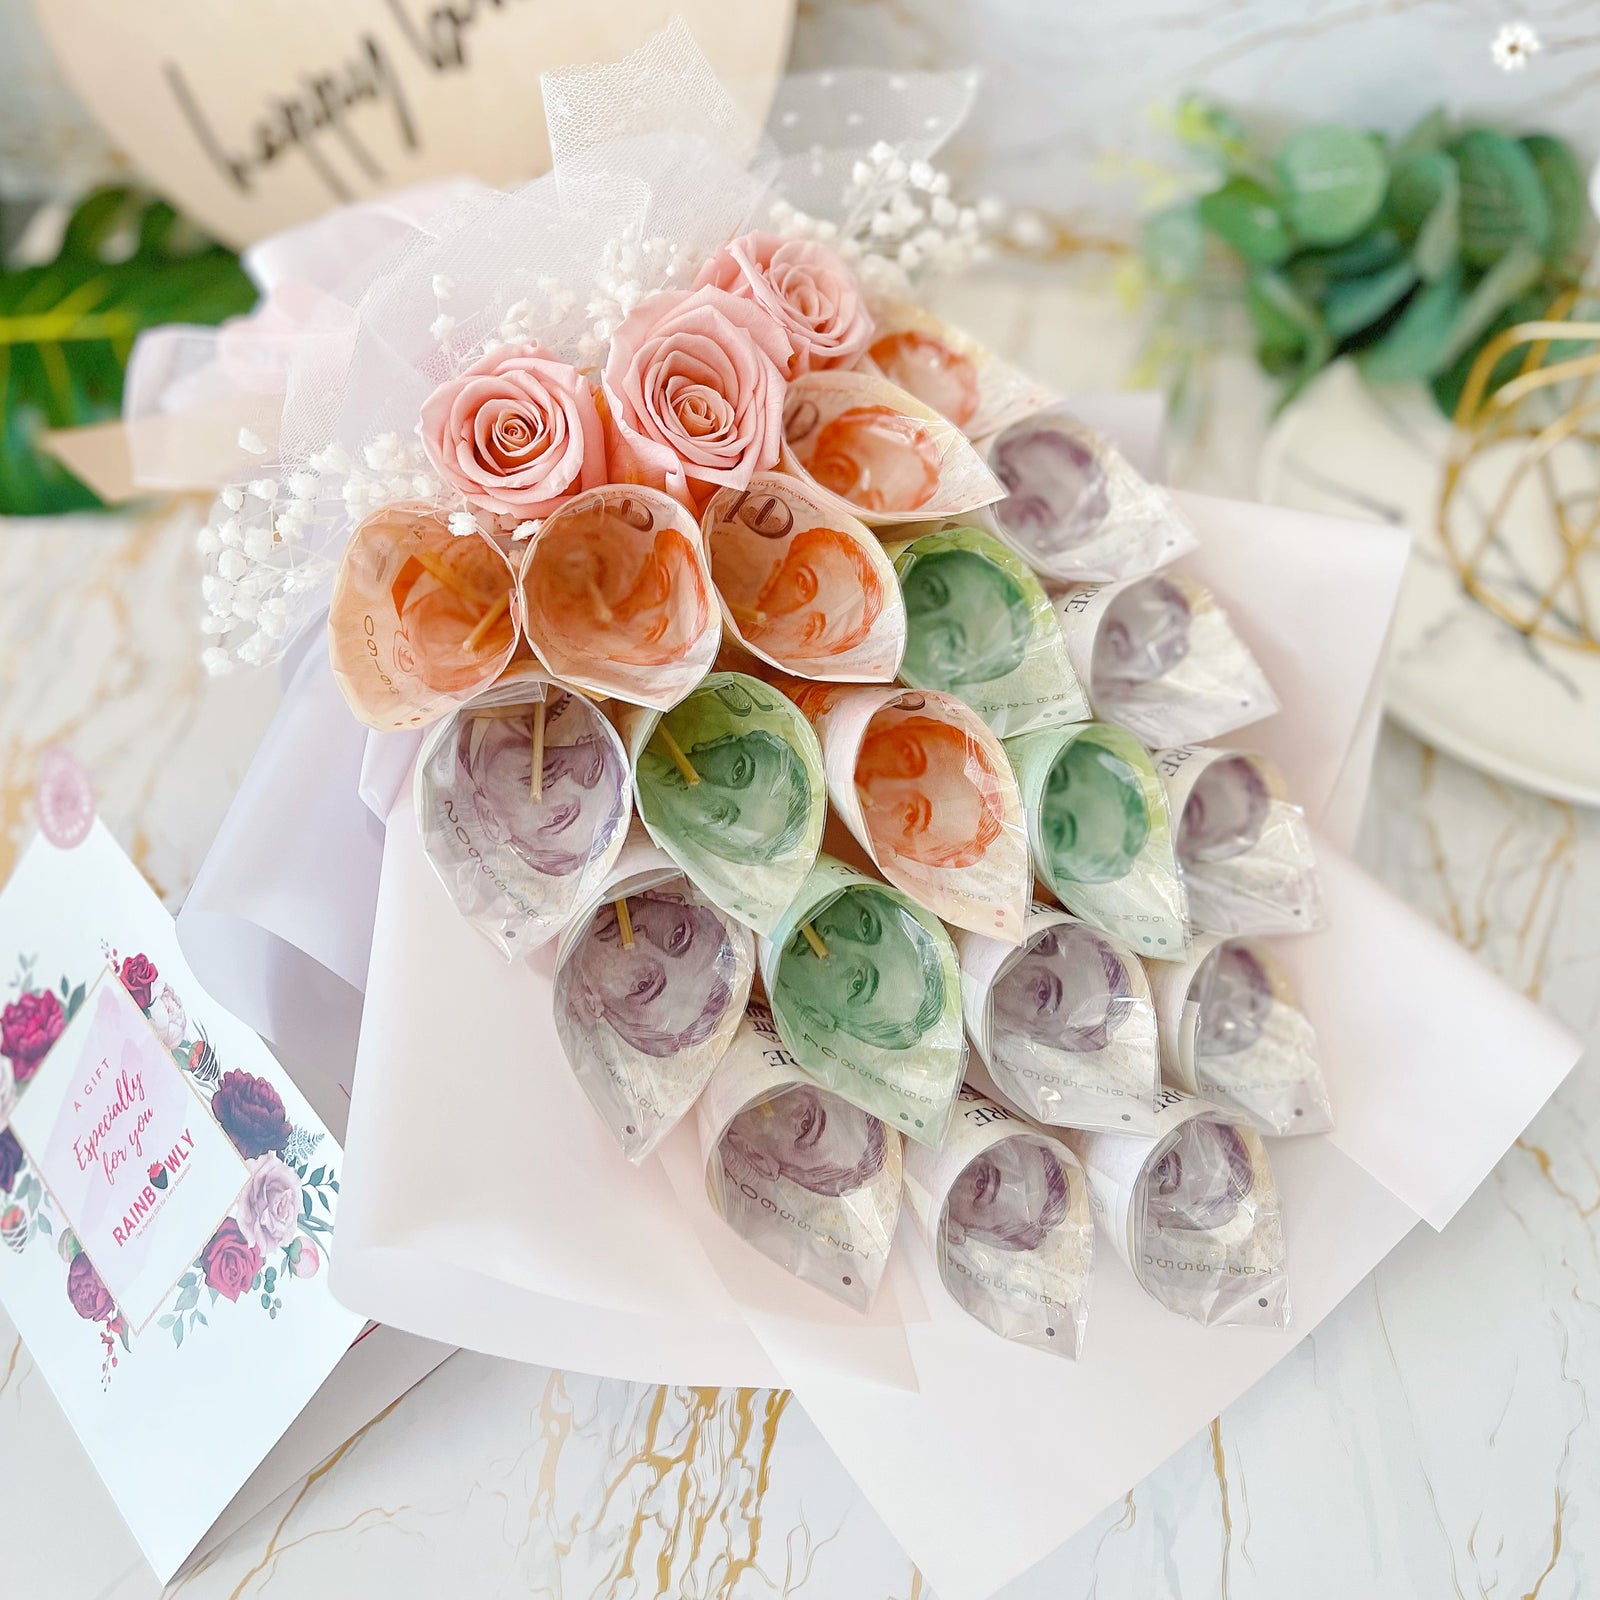 $100 Dollar Thoughts for HER - Luxury Cash Money Bouquet(1 Day Pre-order,  Cash Notes Included)